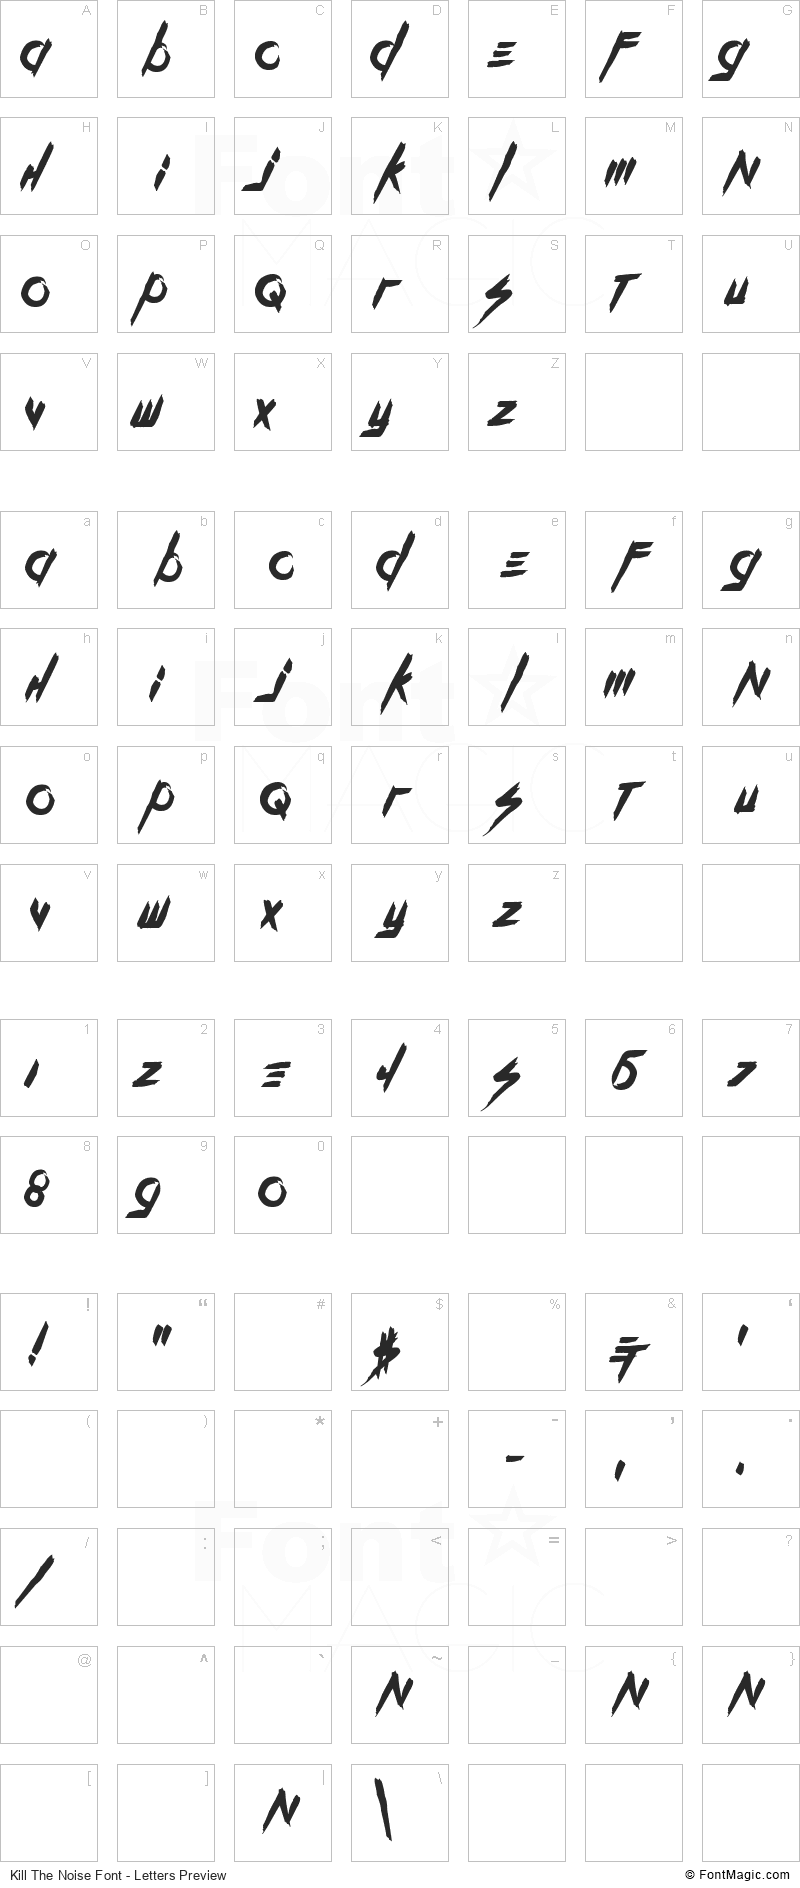 Kill The Noise Font - All Latters Preview Chart